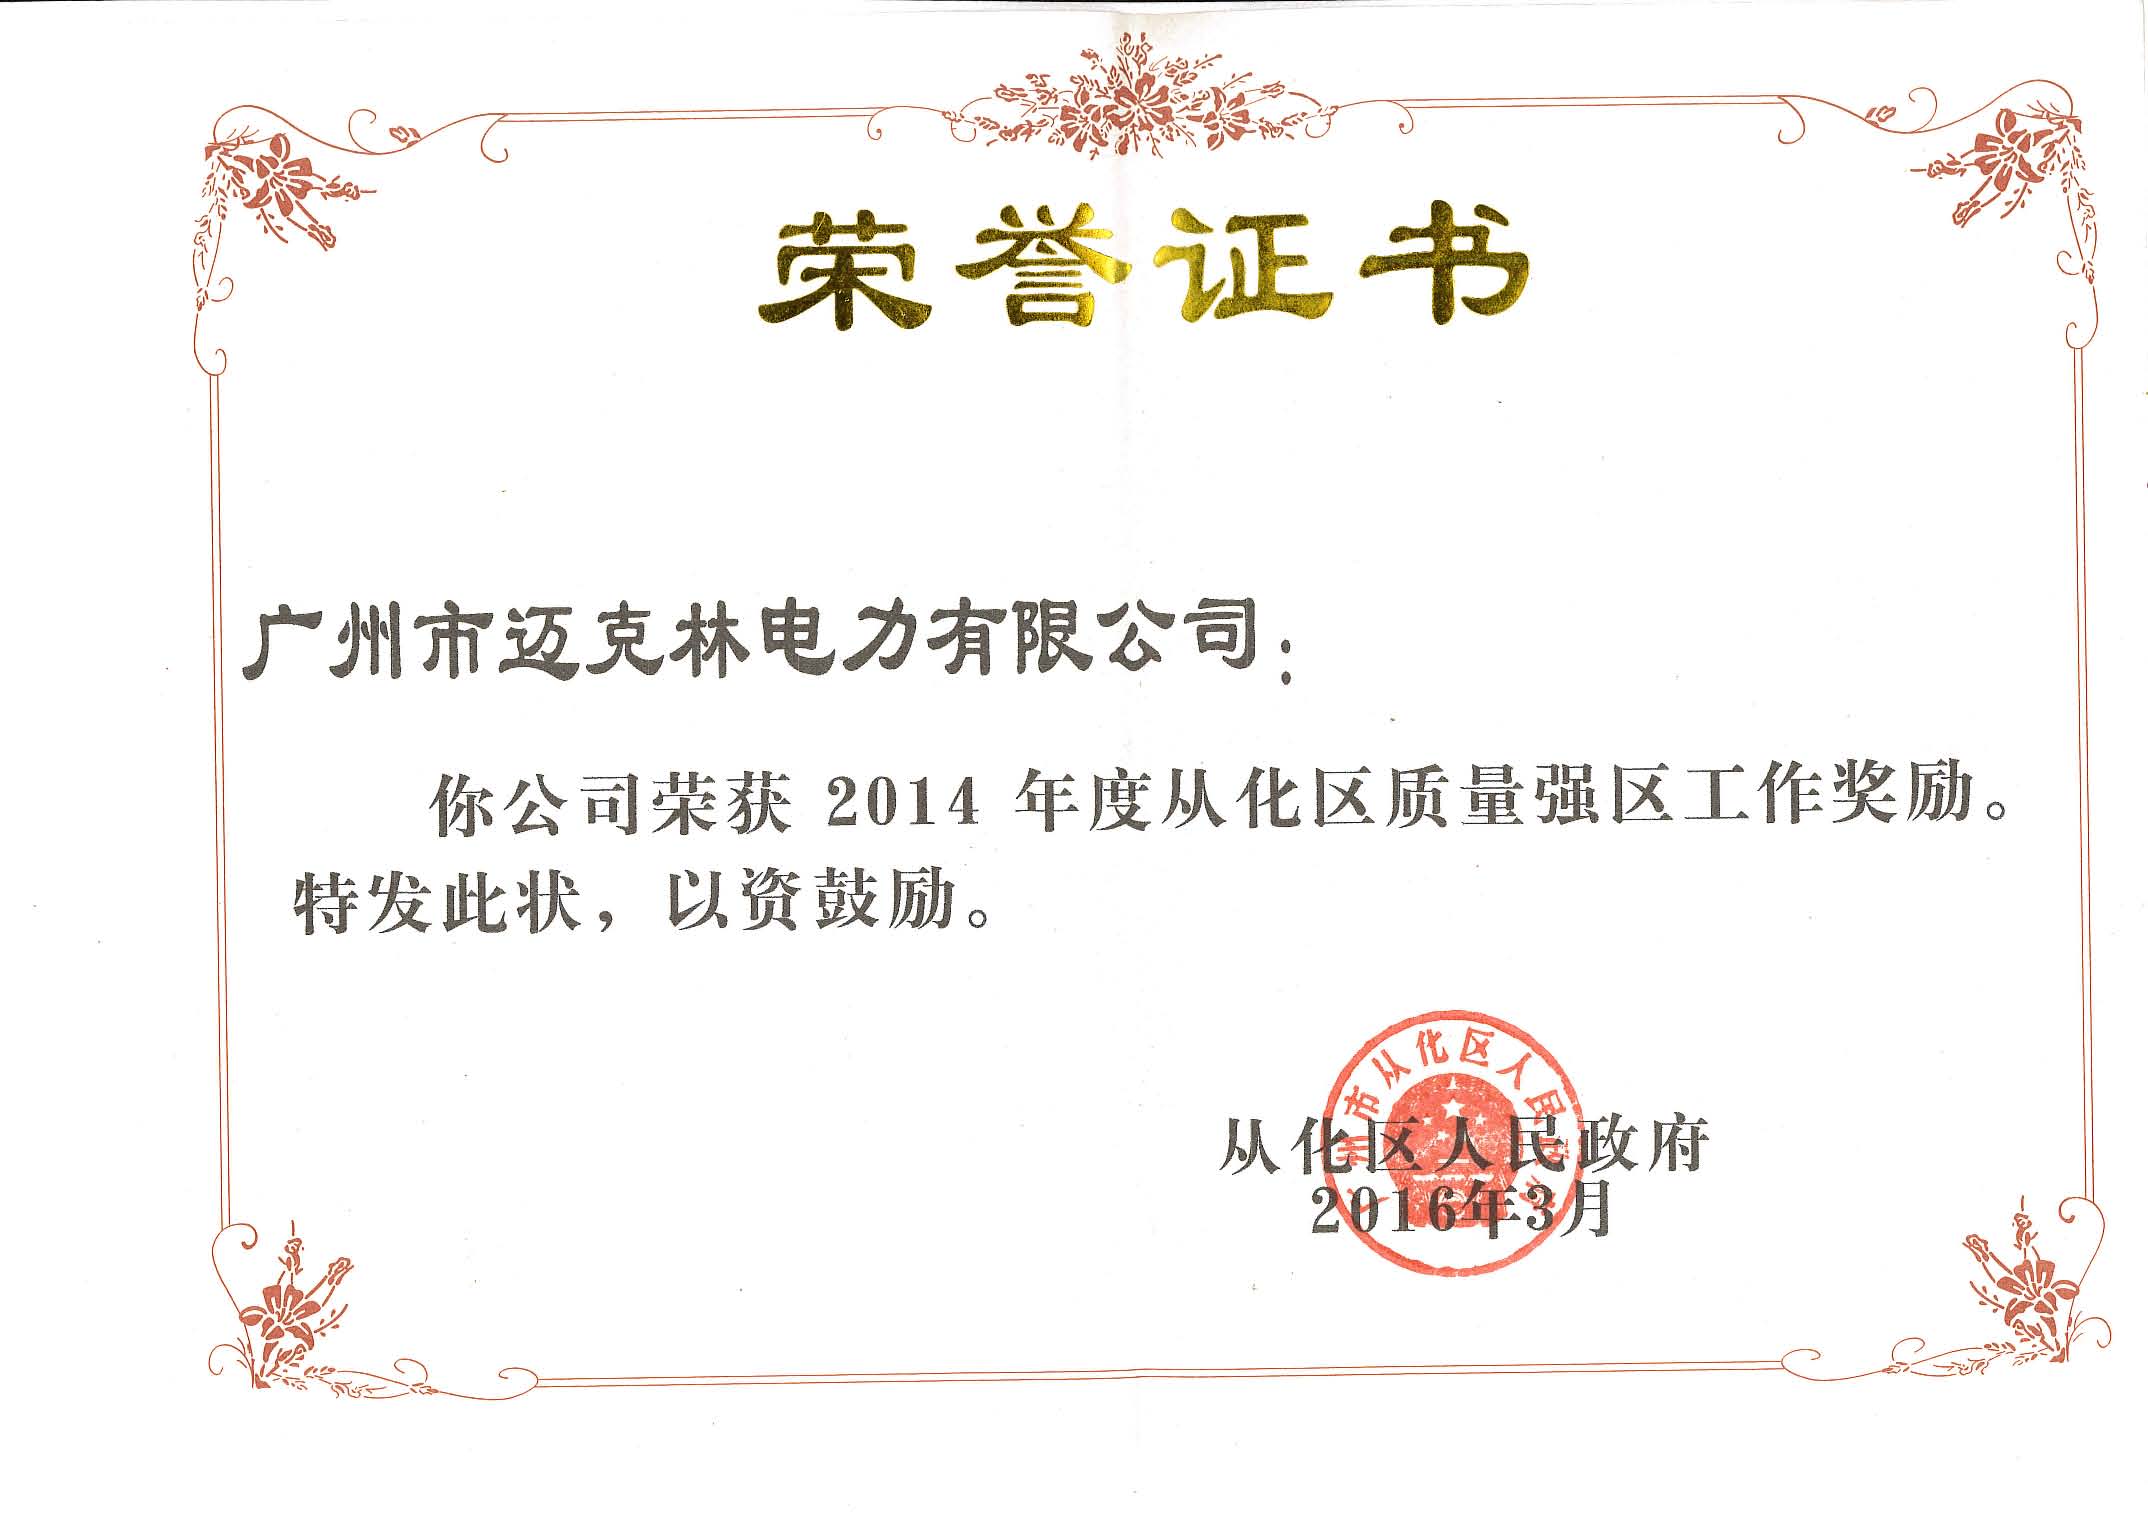 Honorary certificate of Conghua District's strong quality area